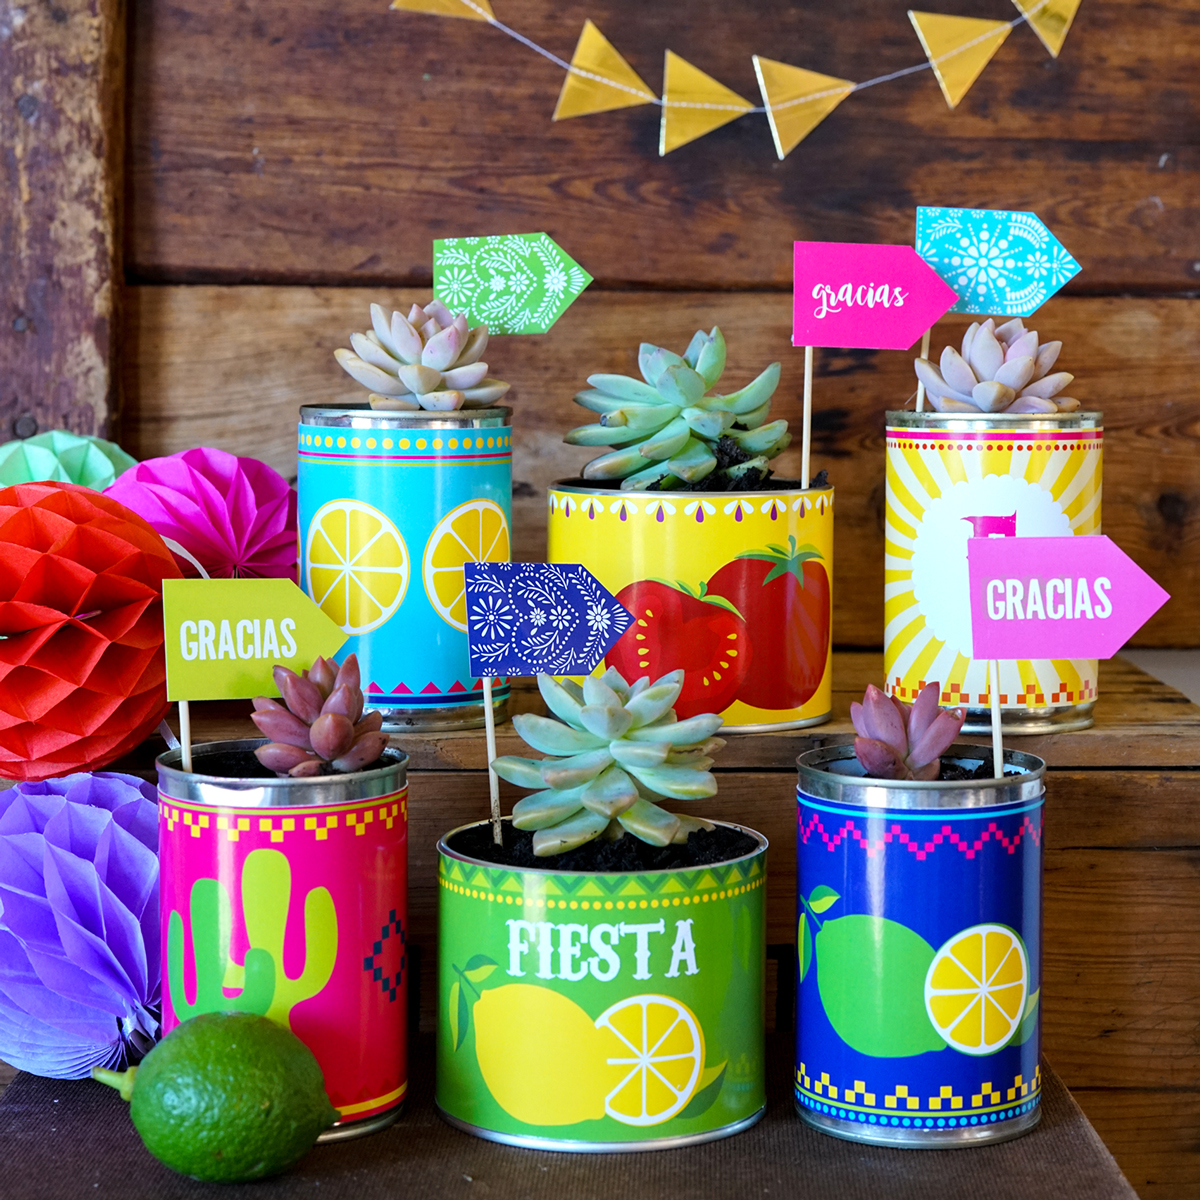 Fiesta Party Favors - Tin Can planters in bright colors